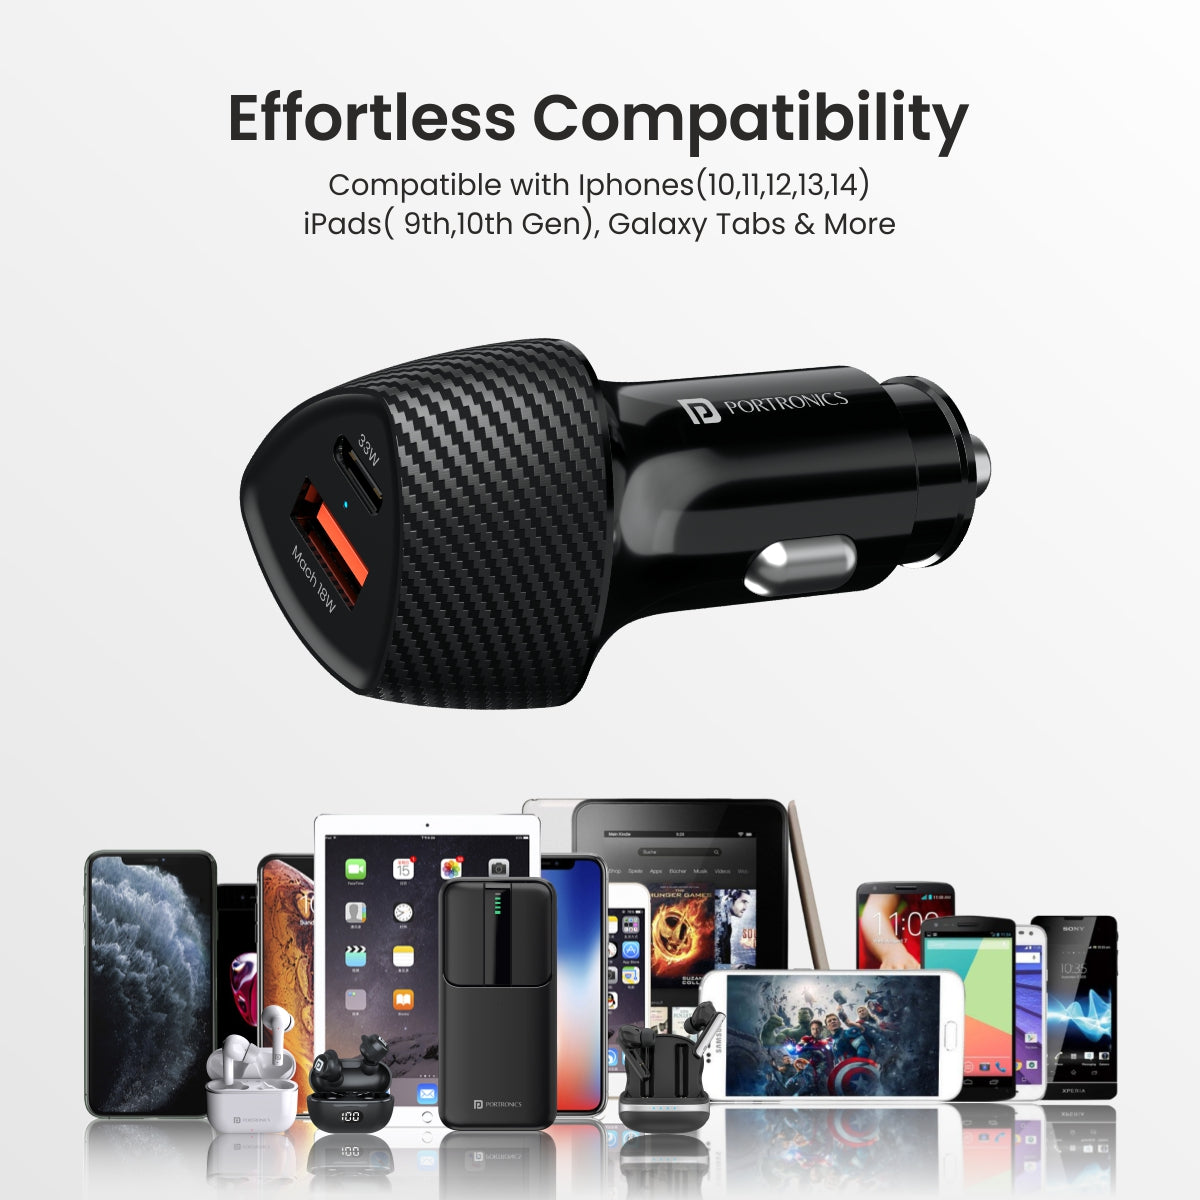 black Portronics car power16 effortless compatibility car charger at best price